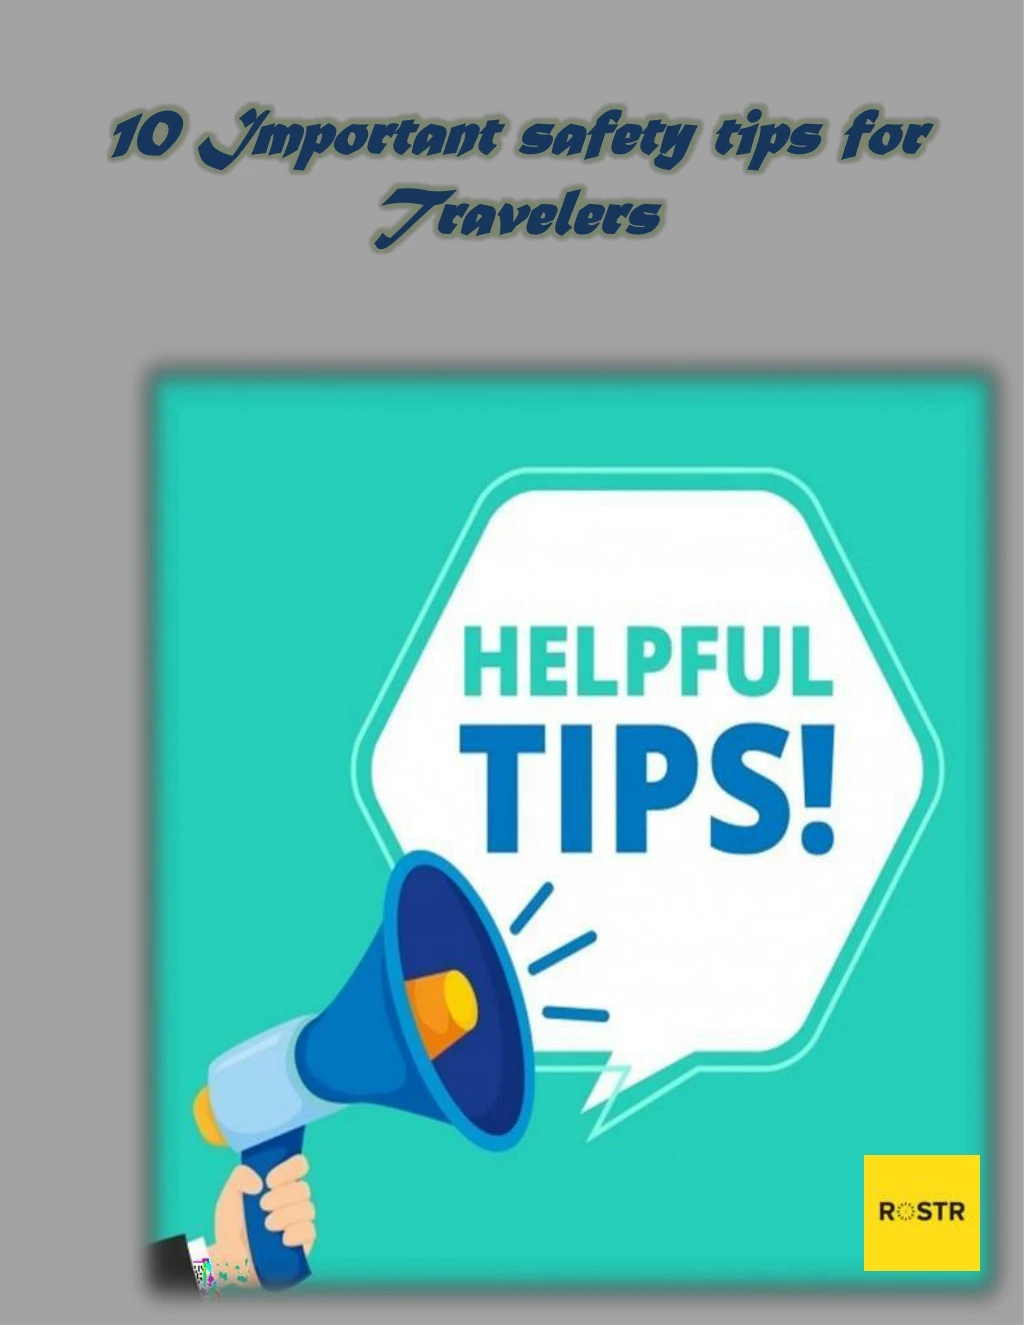 10 important safety tips for travelers